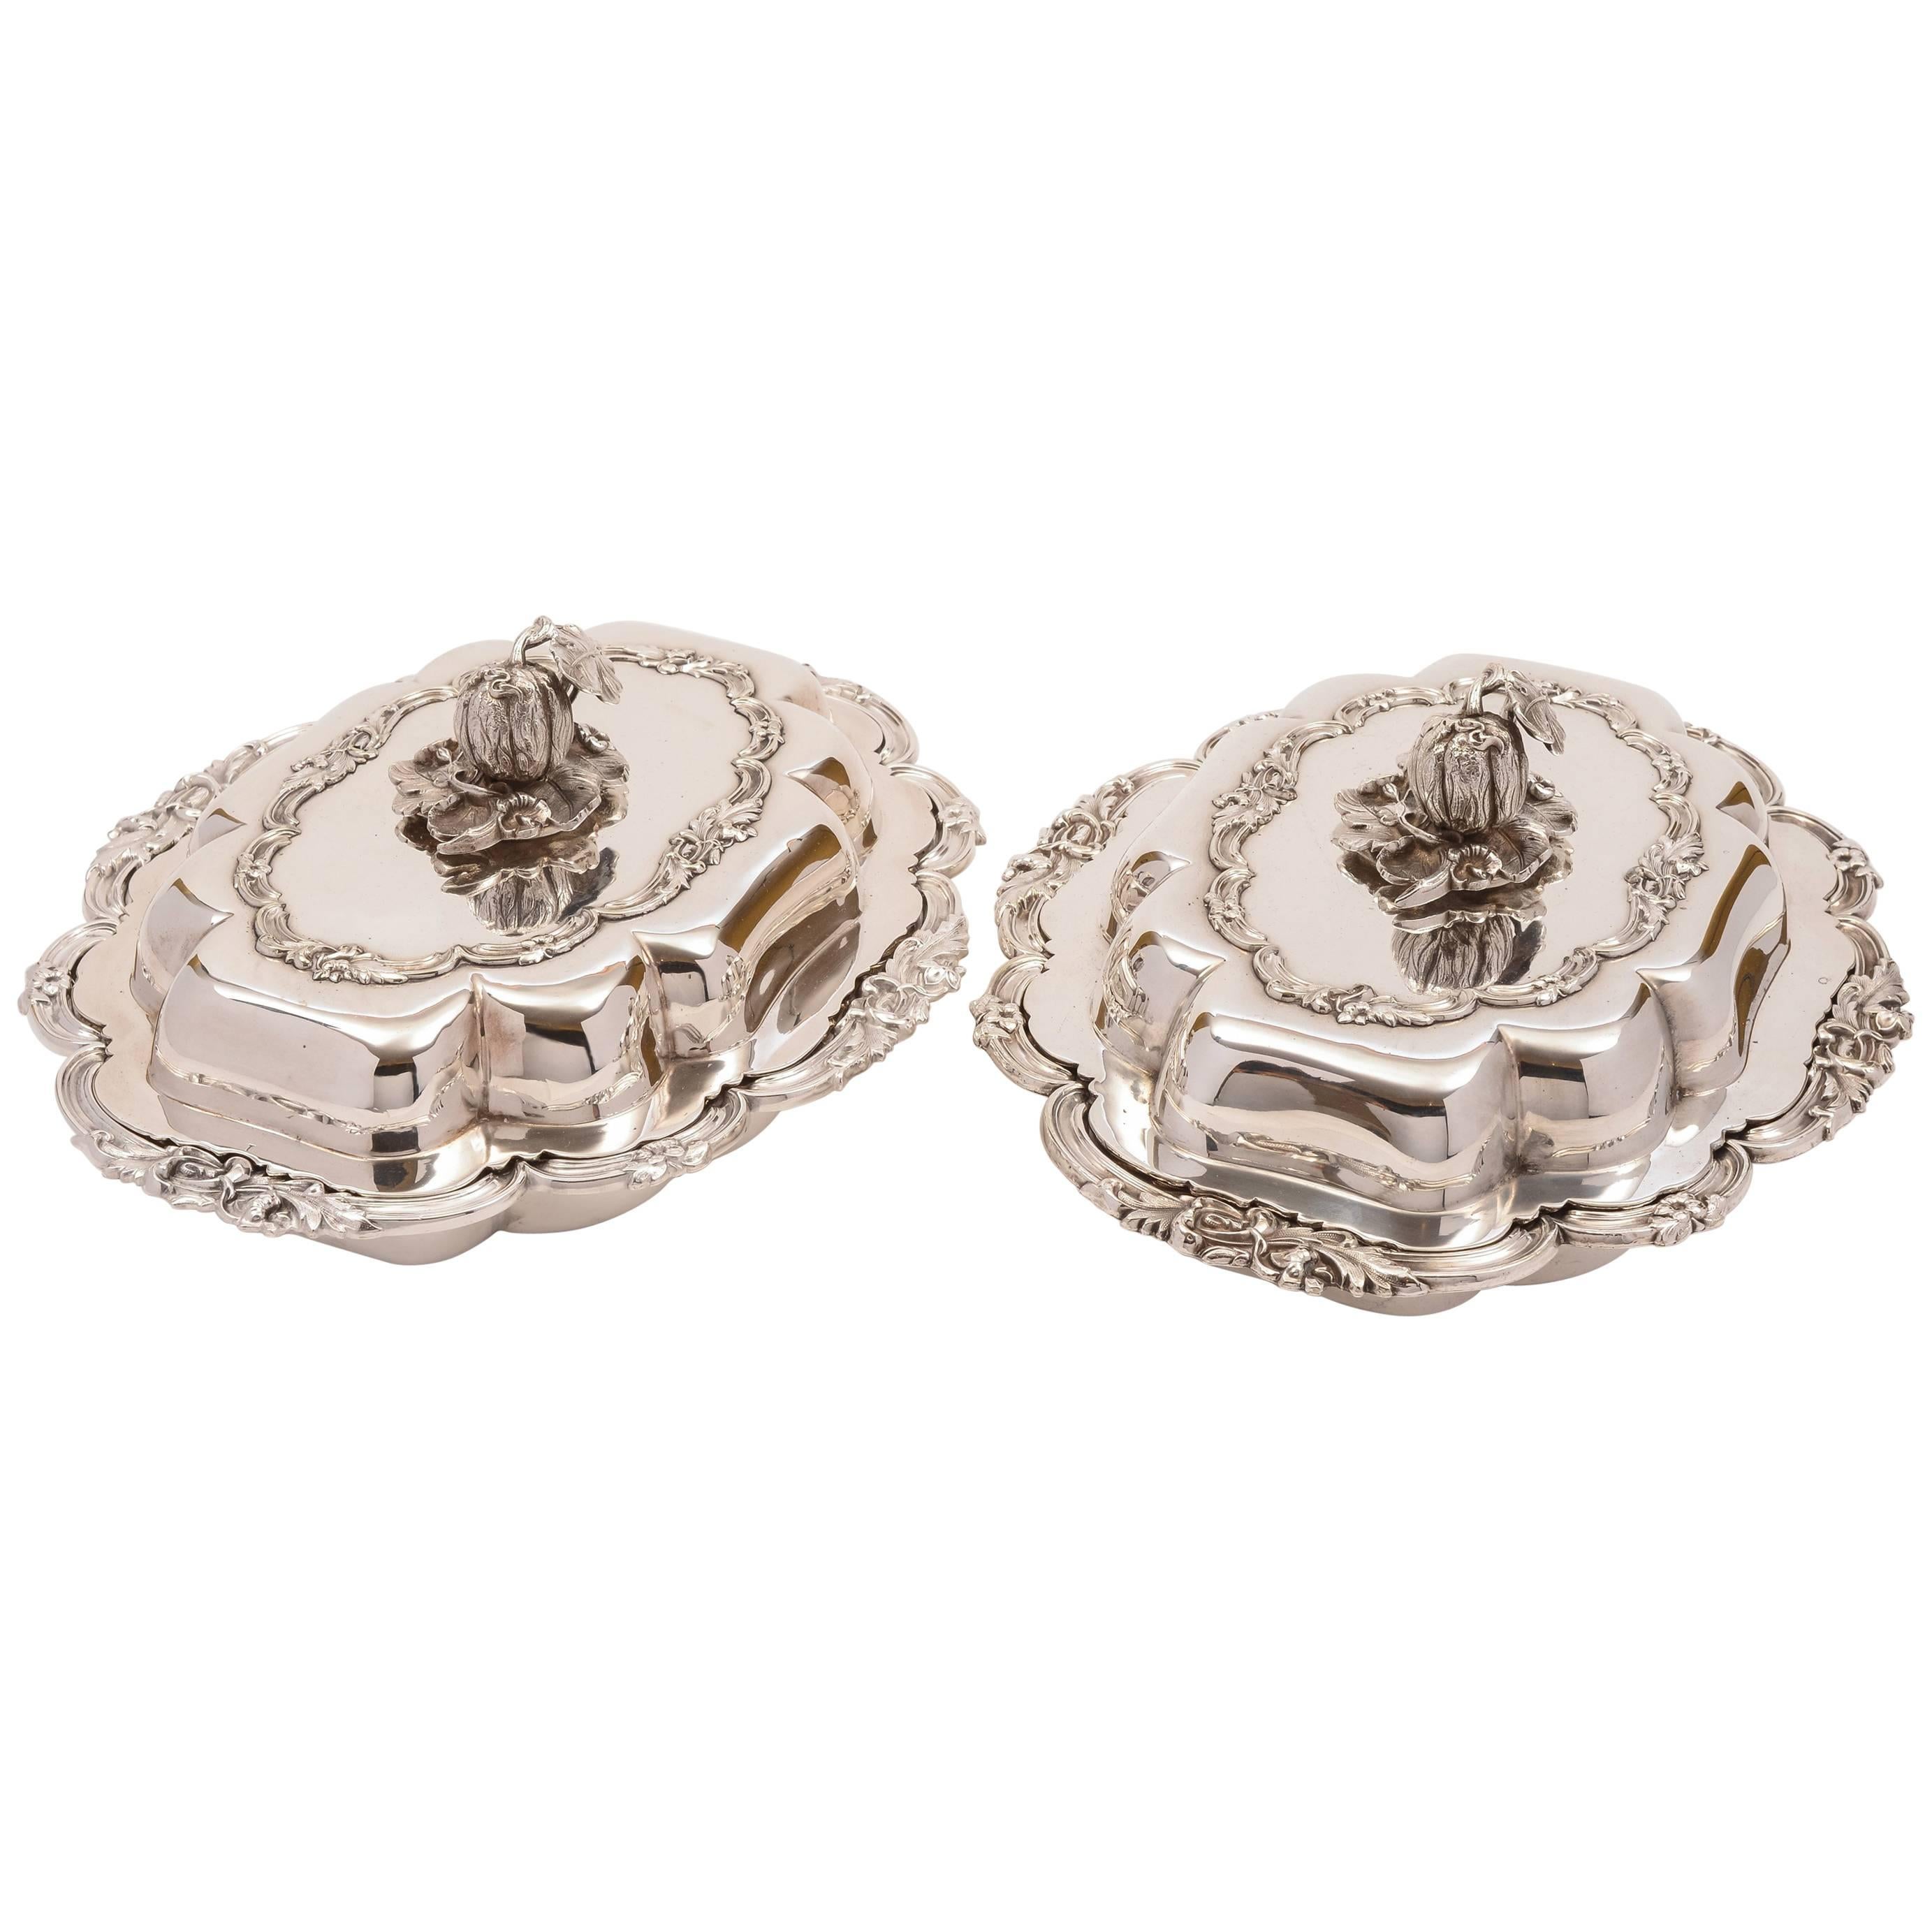 Pair of 19th Century Victorian Silver Plated Entree Dishes